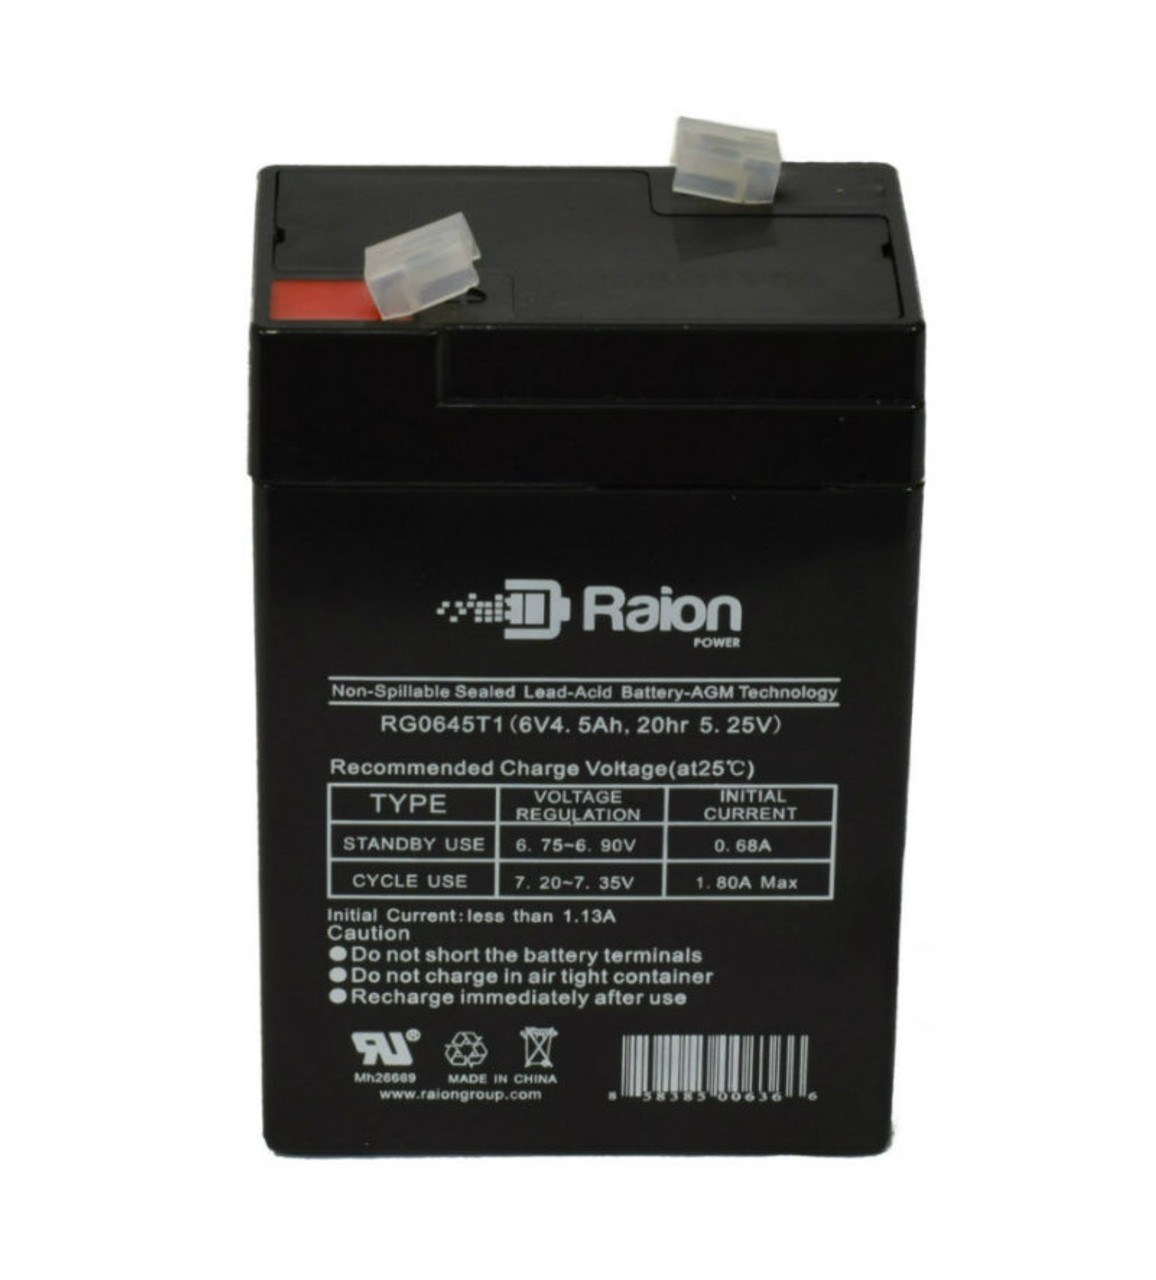 Raion Power RG0645T1 Replacement Battery Cartridge for Big Beam 2IL6S50